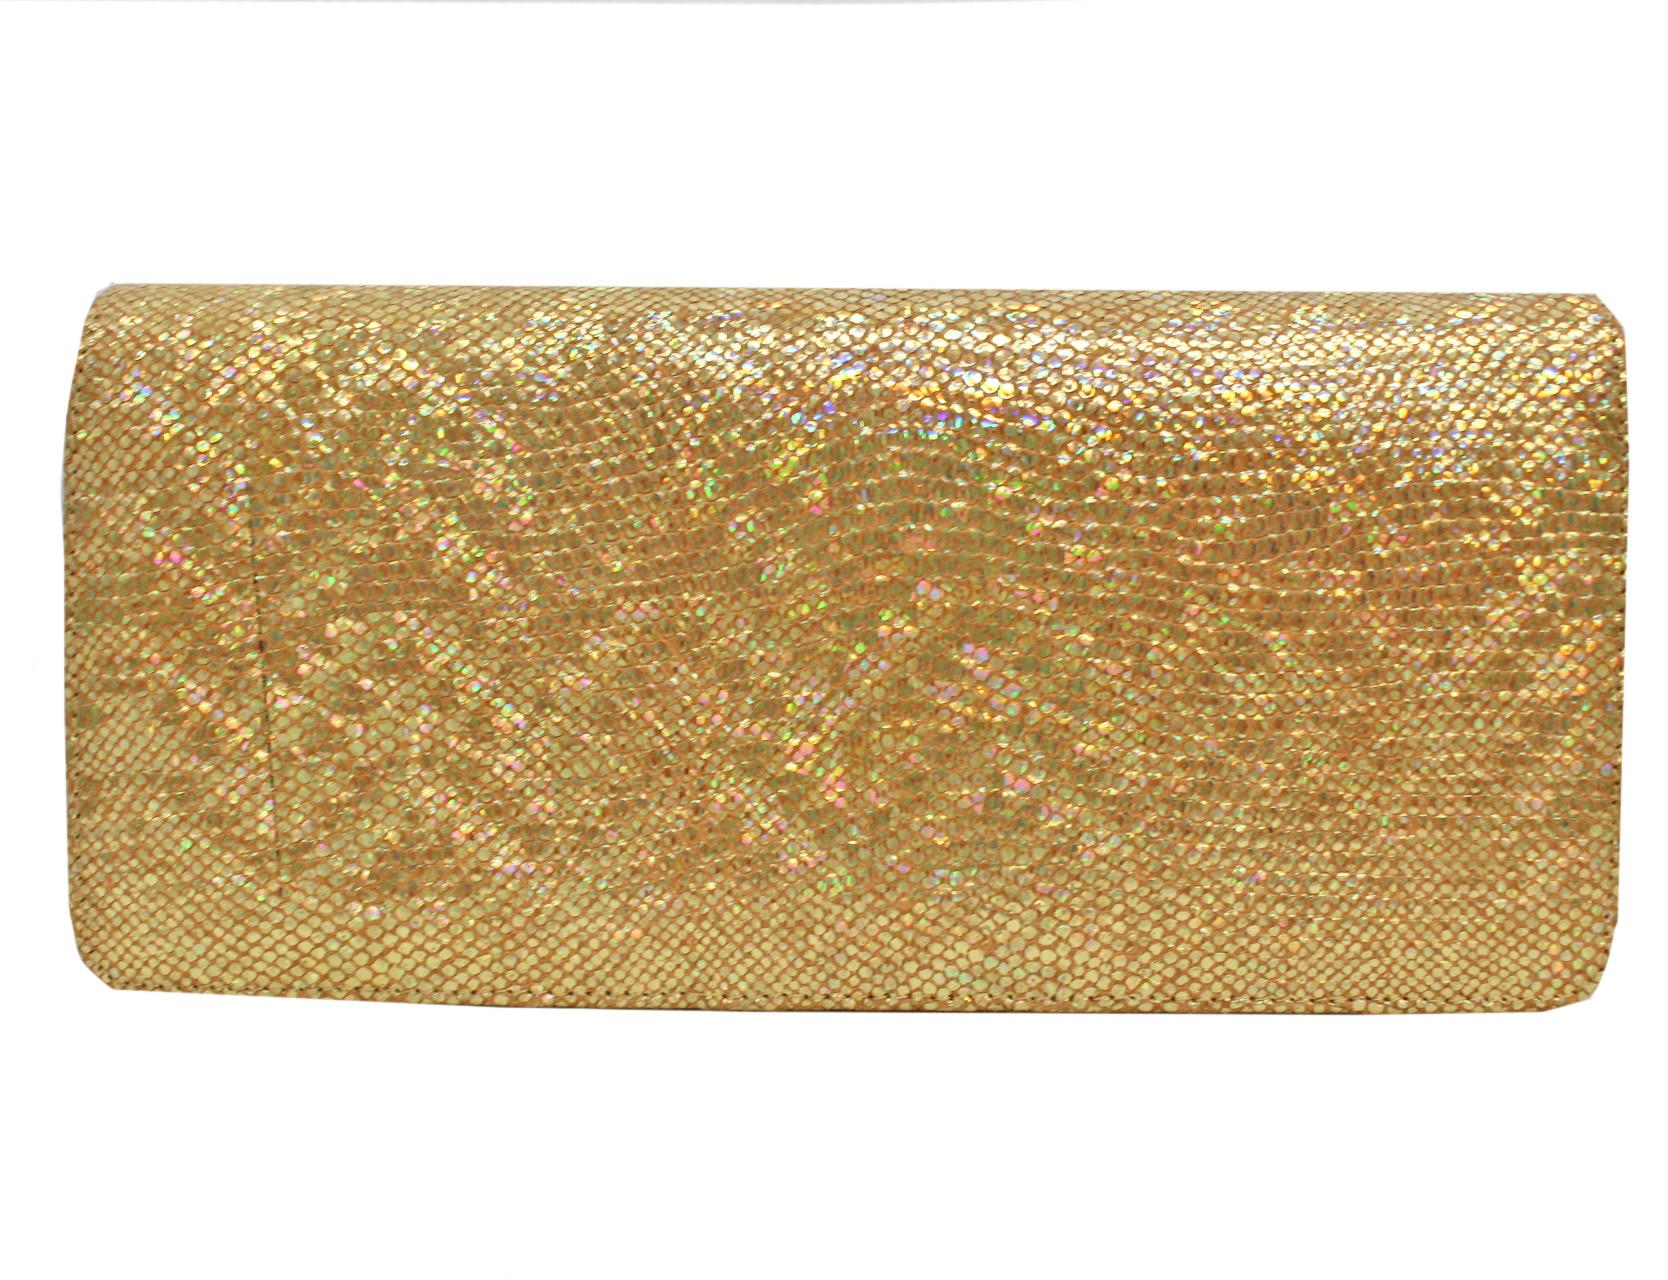 Brown Luscious Lana Marks Gold Glitter Clutch with Gold Tone and Faux Pearl Chain